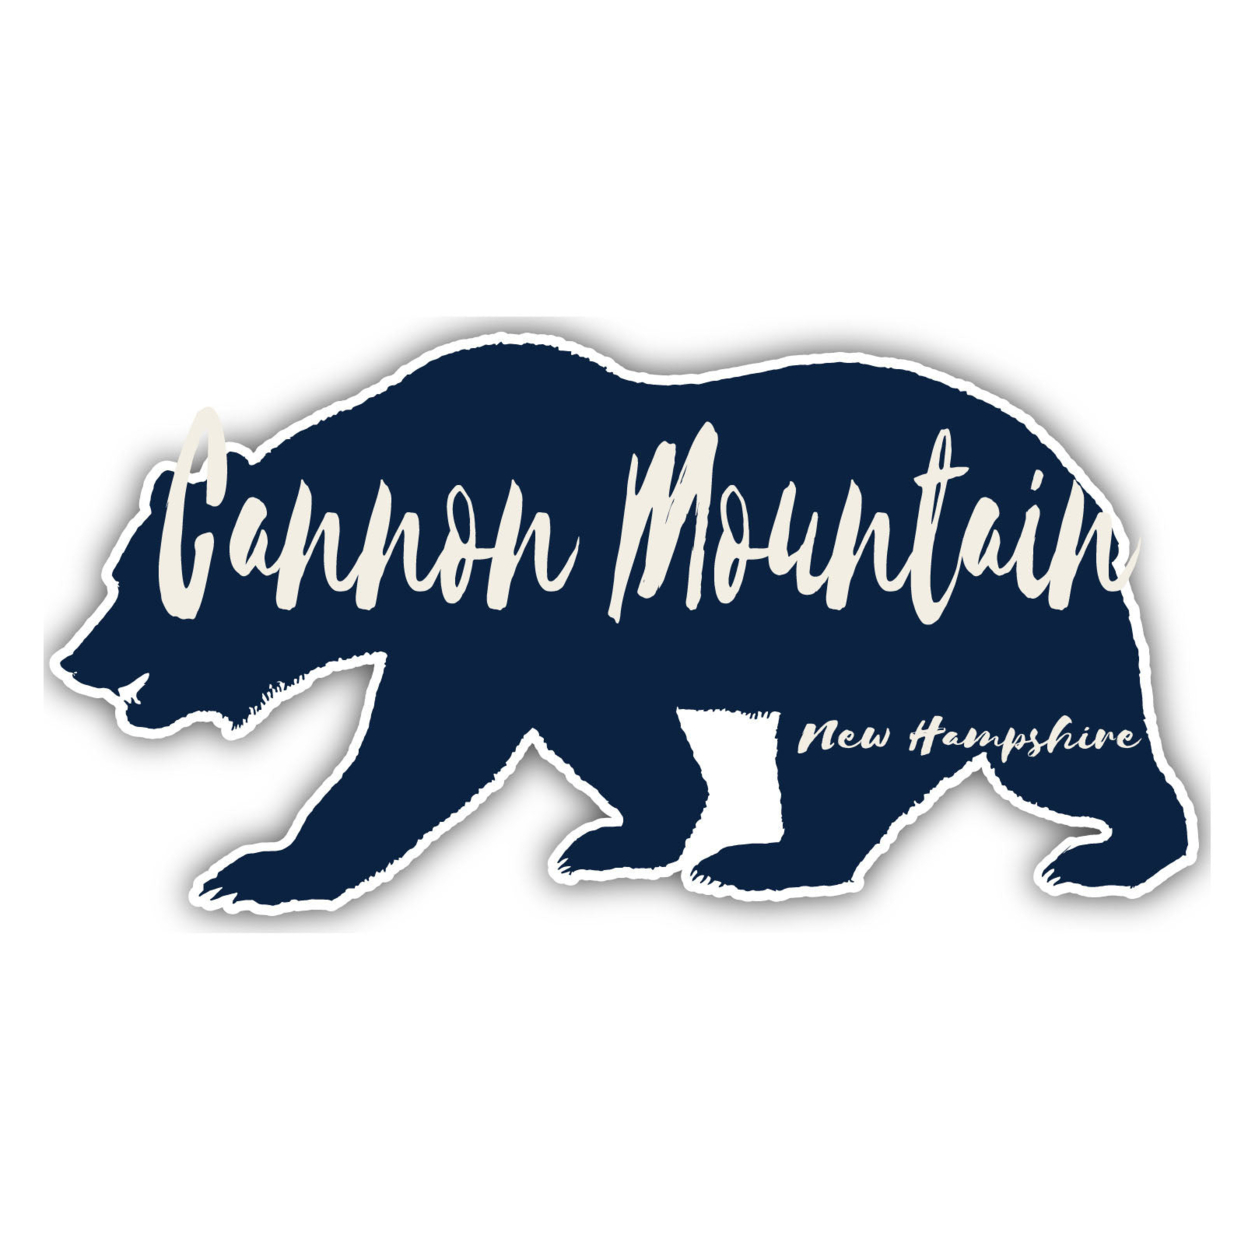 Cannon Mountain New Hampshire Souvenir Decorative Stickers (Choose Theme And Size) - 4-Pack, 2-Inch, Bear